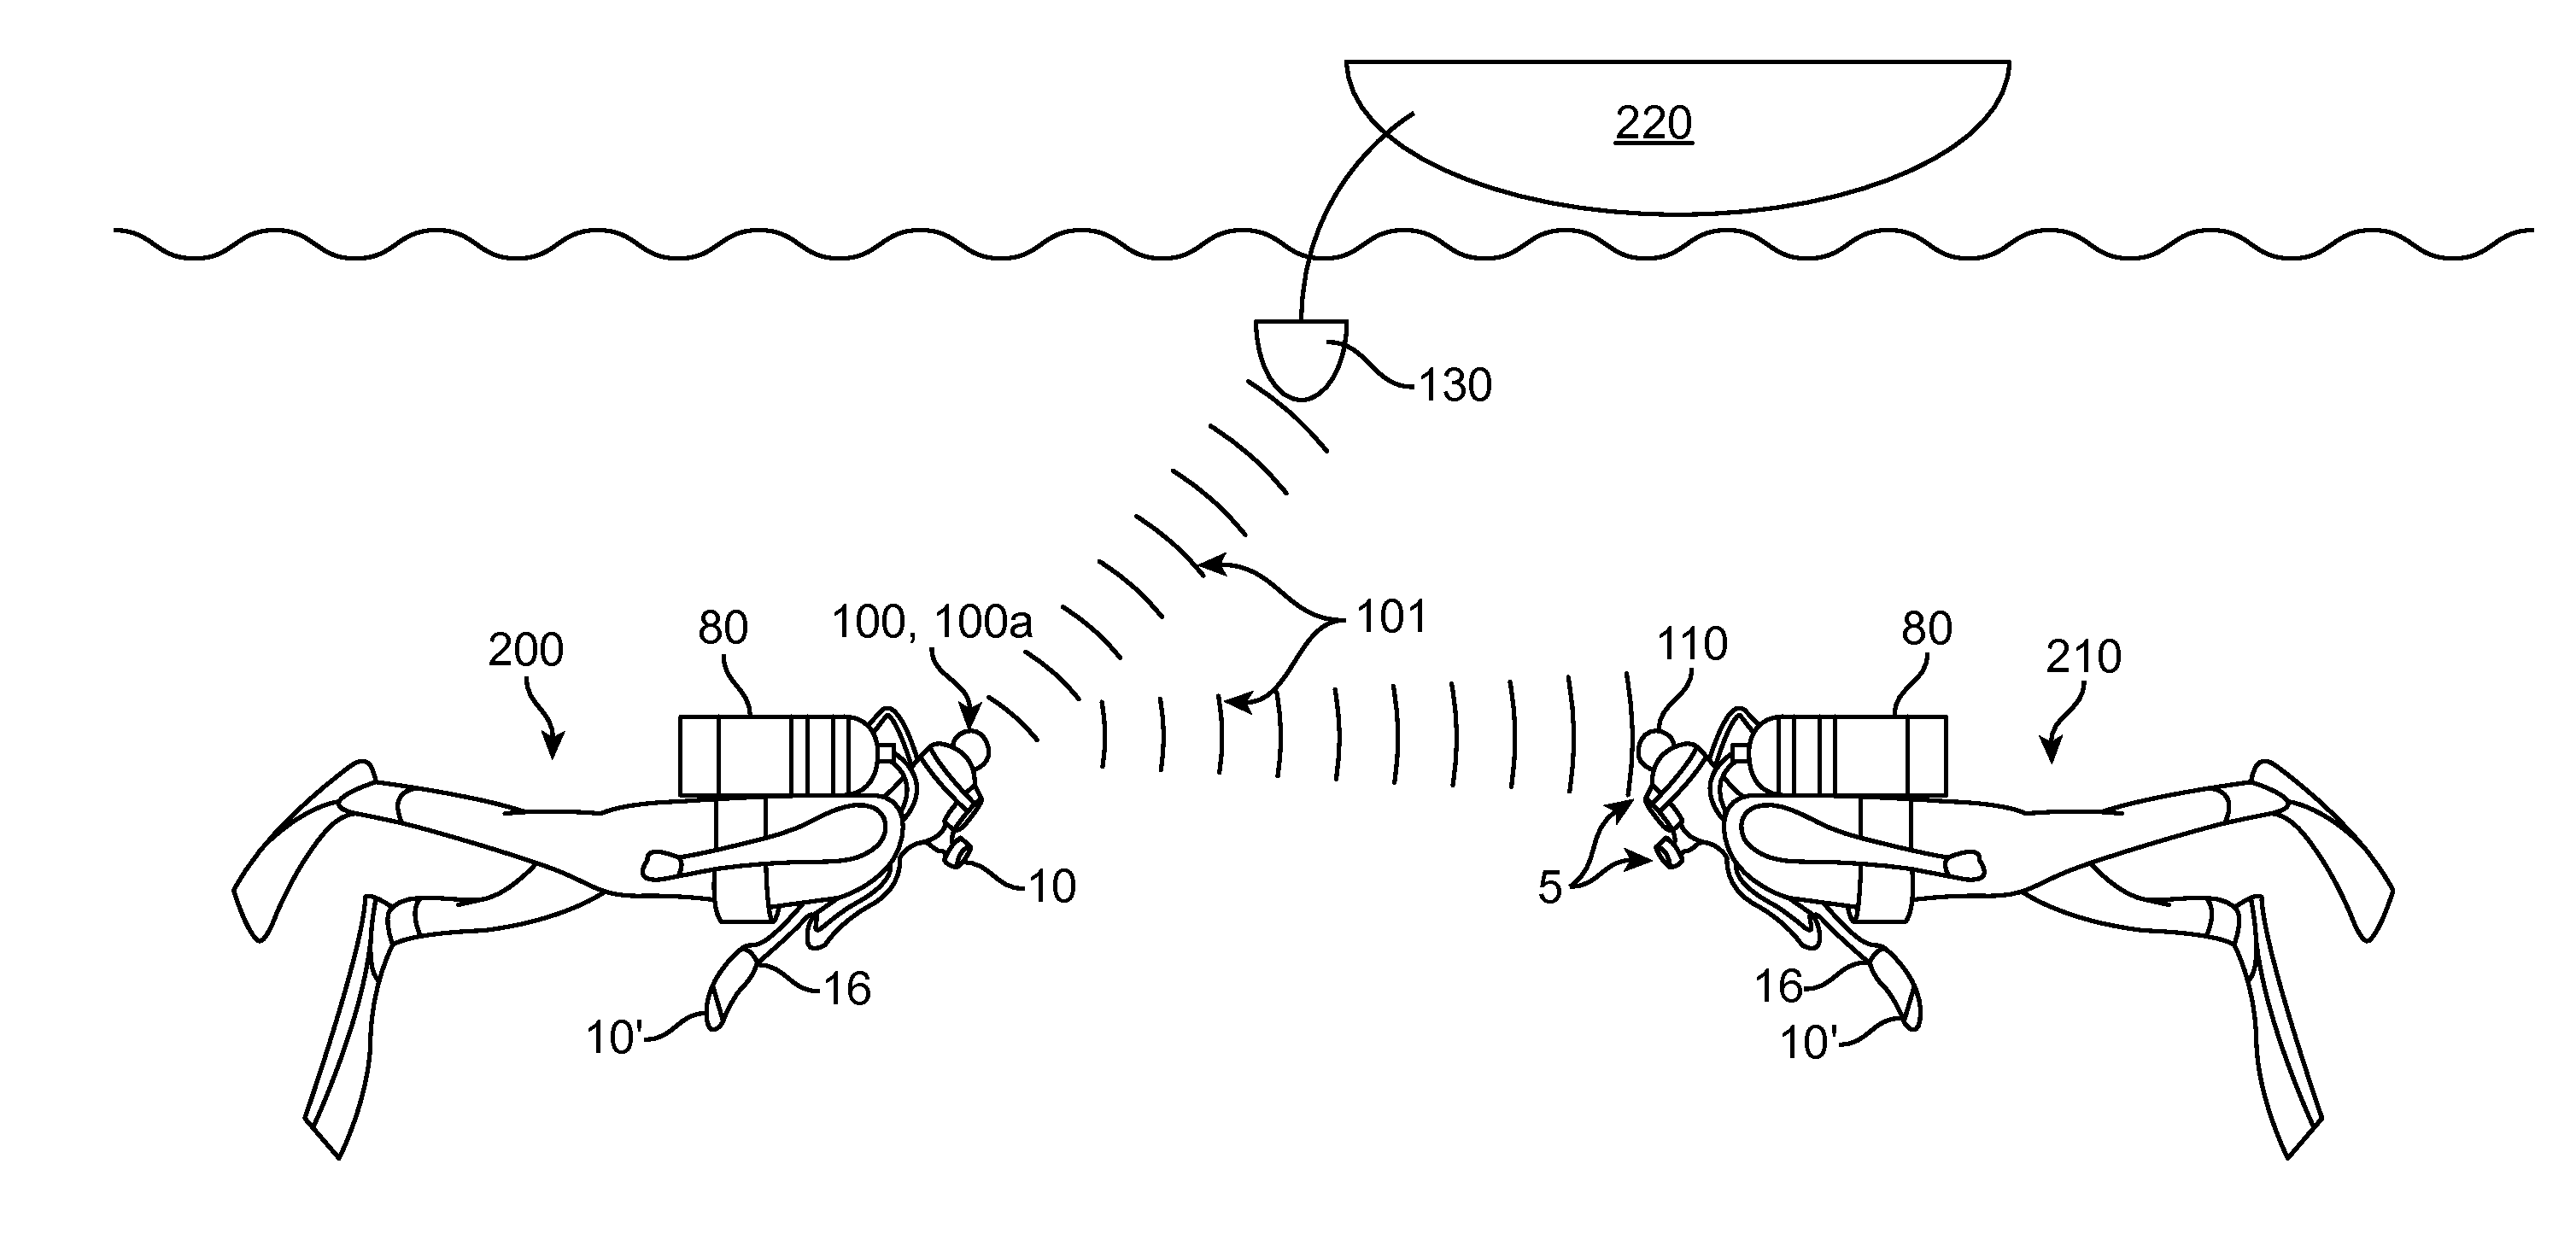 Apparatus, system and method for underwater voice communication by a diver